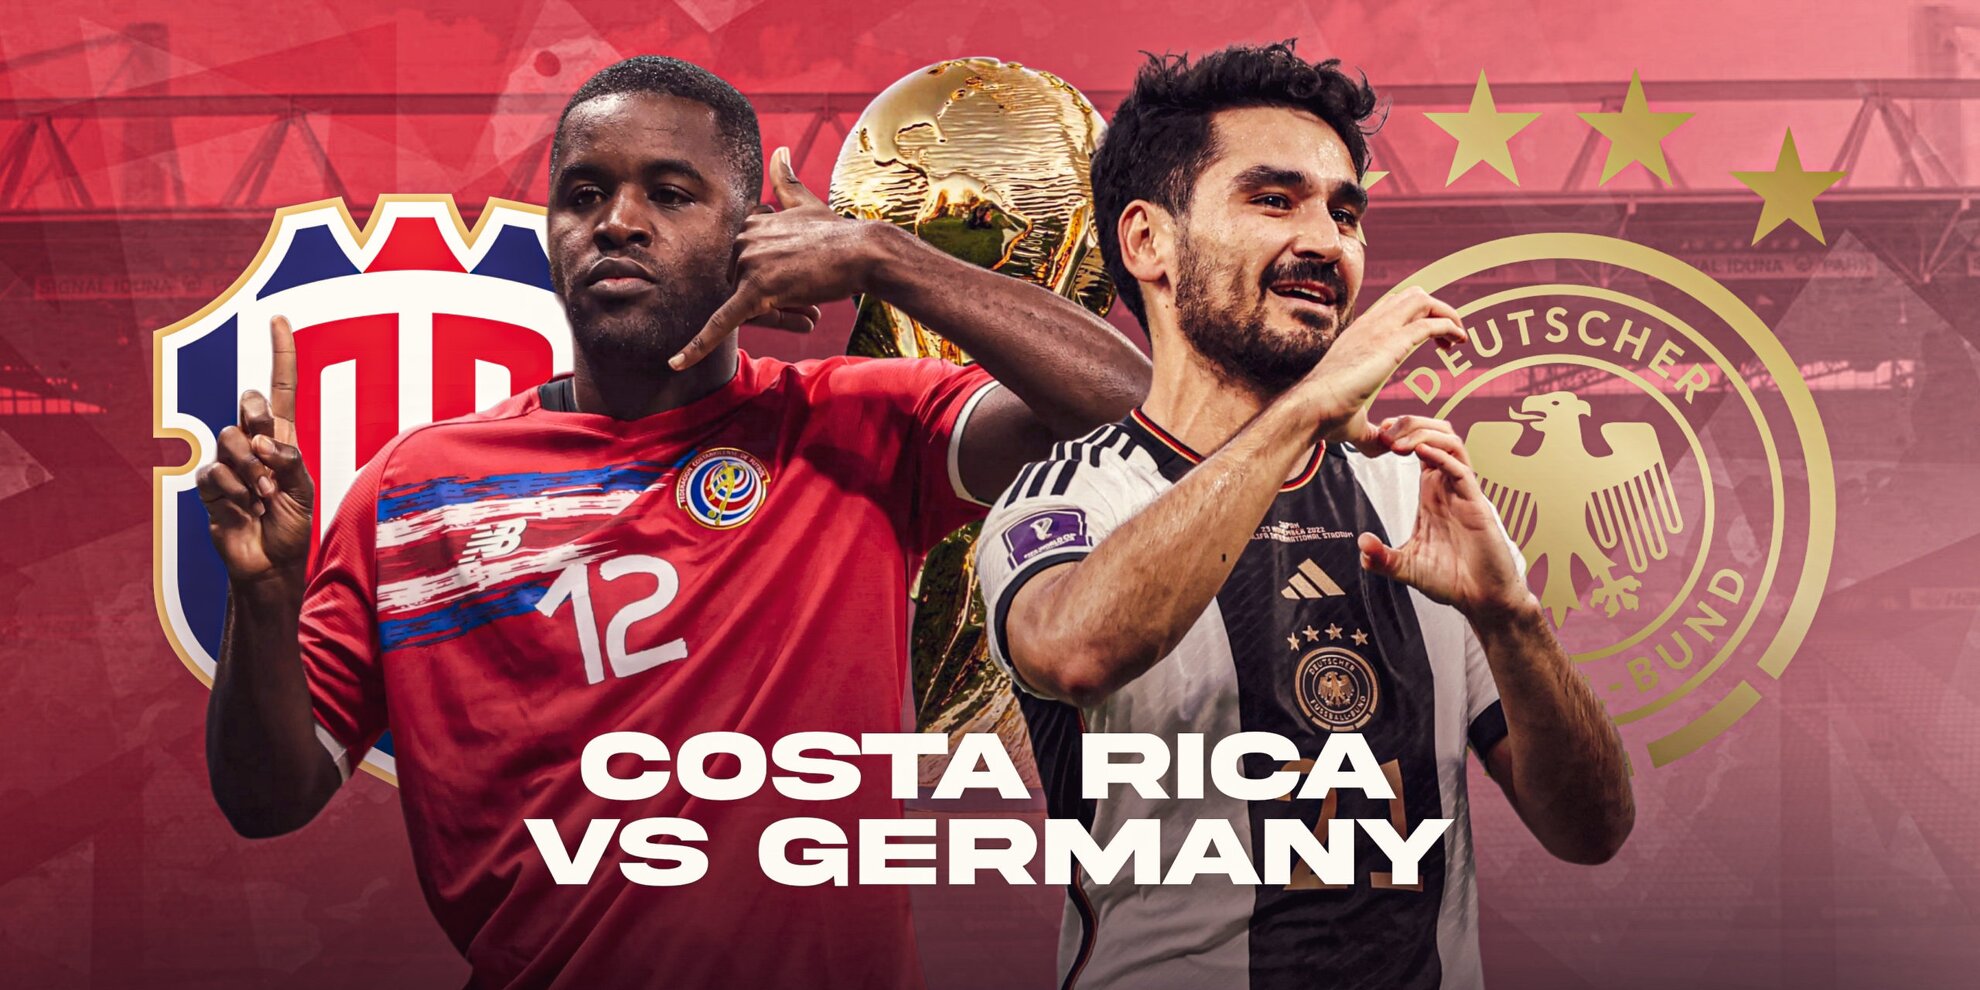 Costa Rica vs Germany: Predicted lineup, injury news, and head-to-head